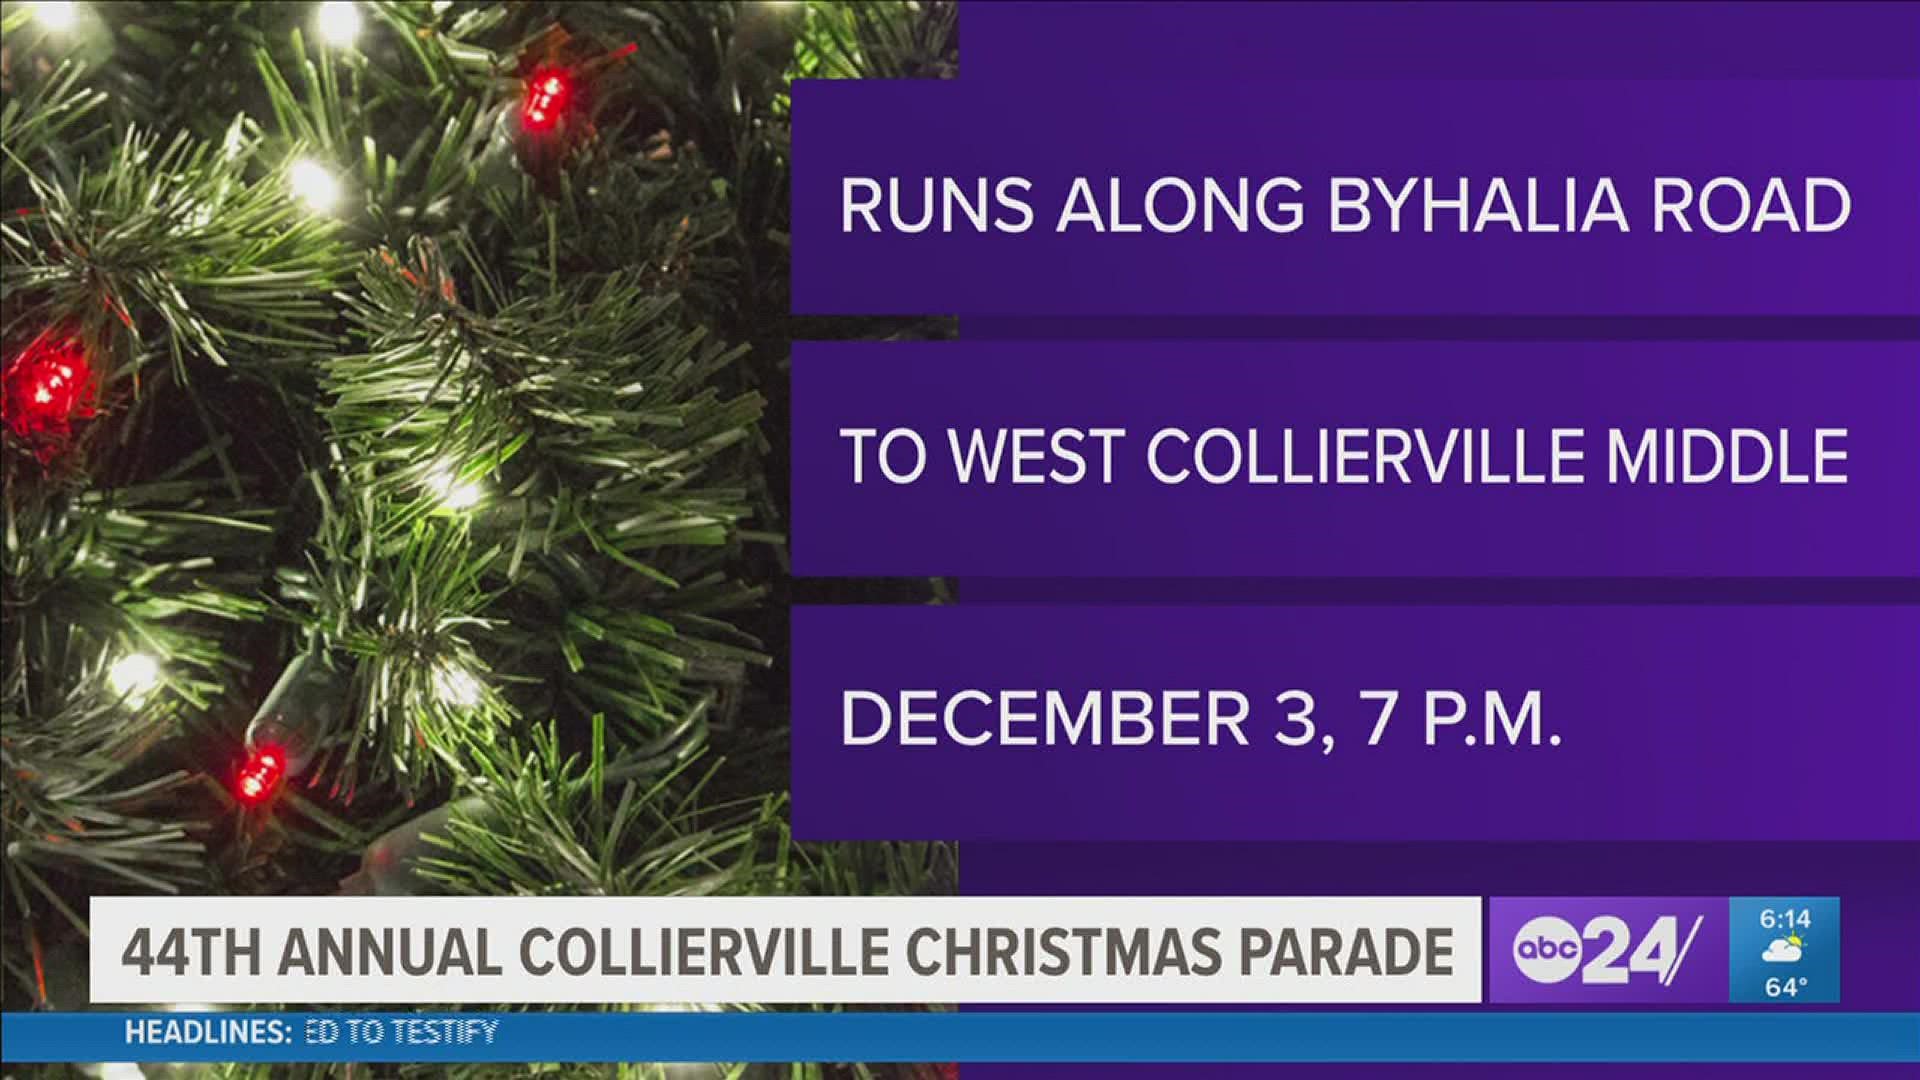 The 44th annual parade will be on Friday, December 3rd.